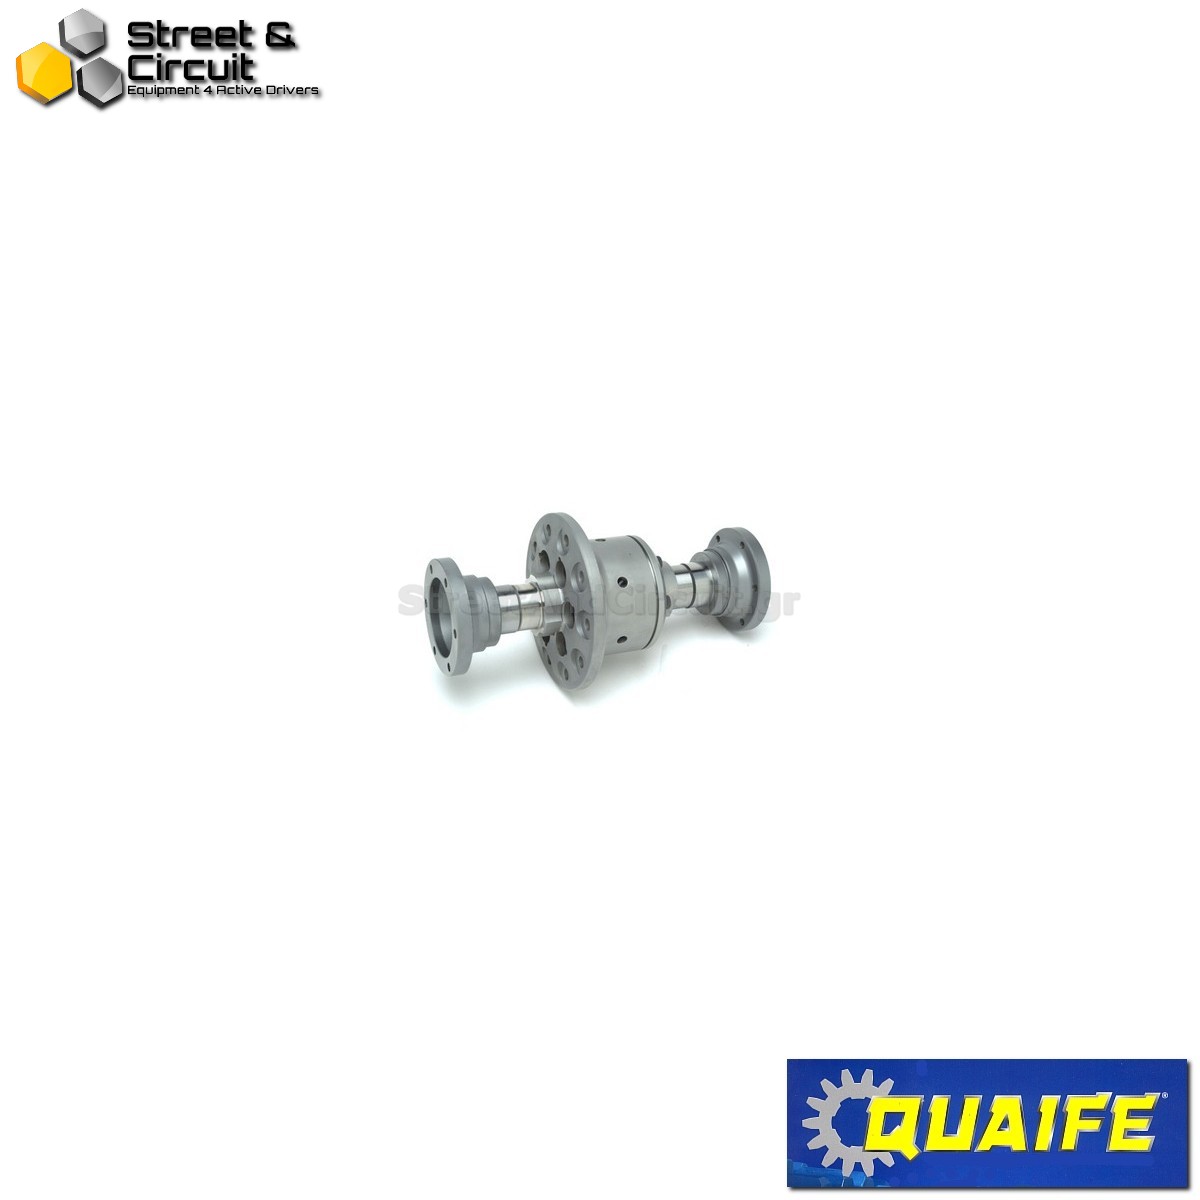 Ford Escort Cosworth rear Quaife ATB Μπλοκέ Διαφορικό/Limited Slip Diff including flanges